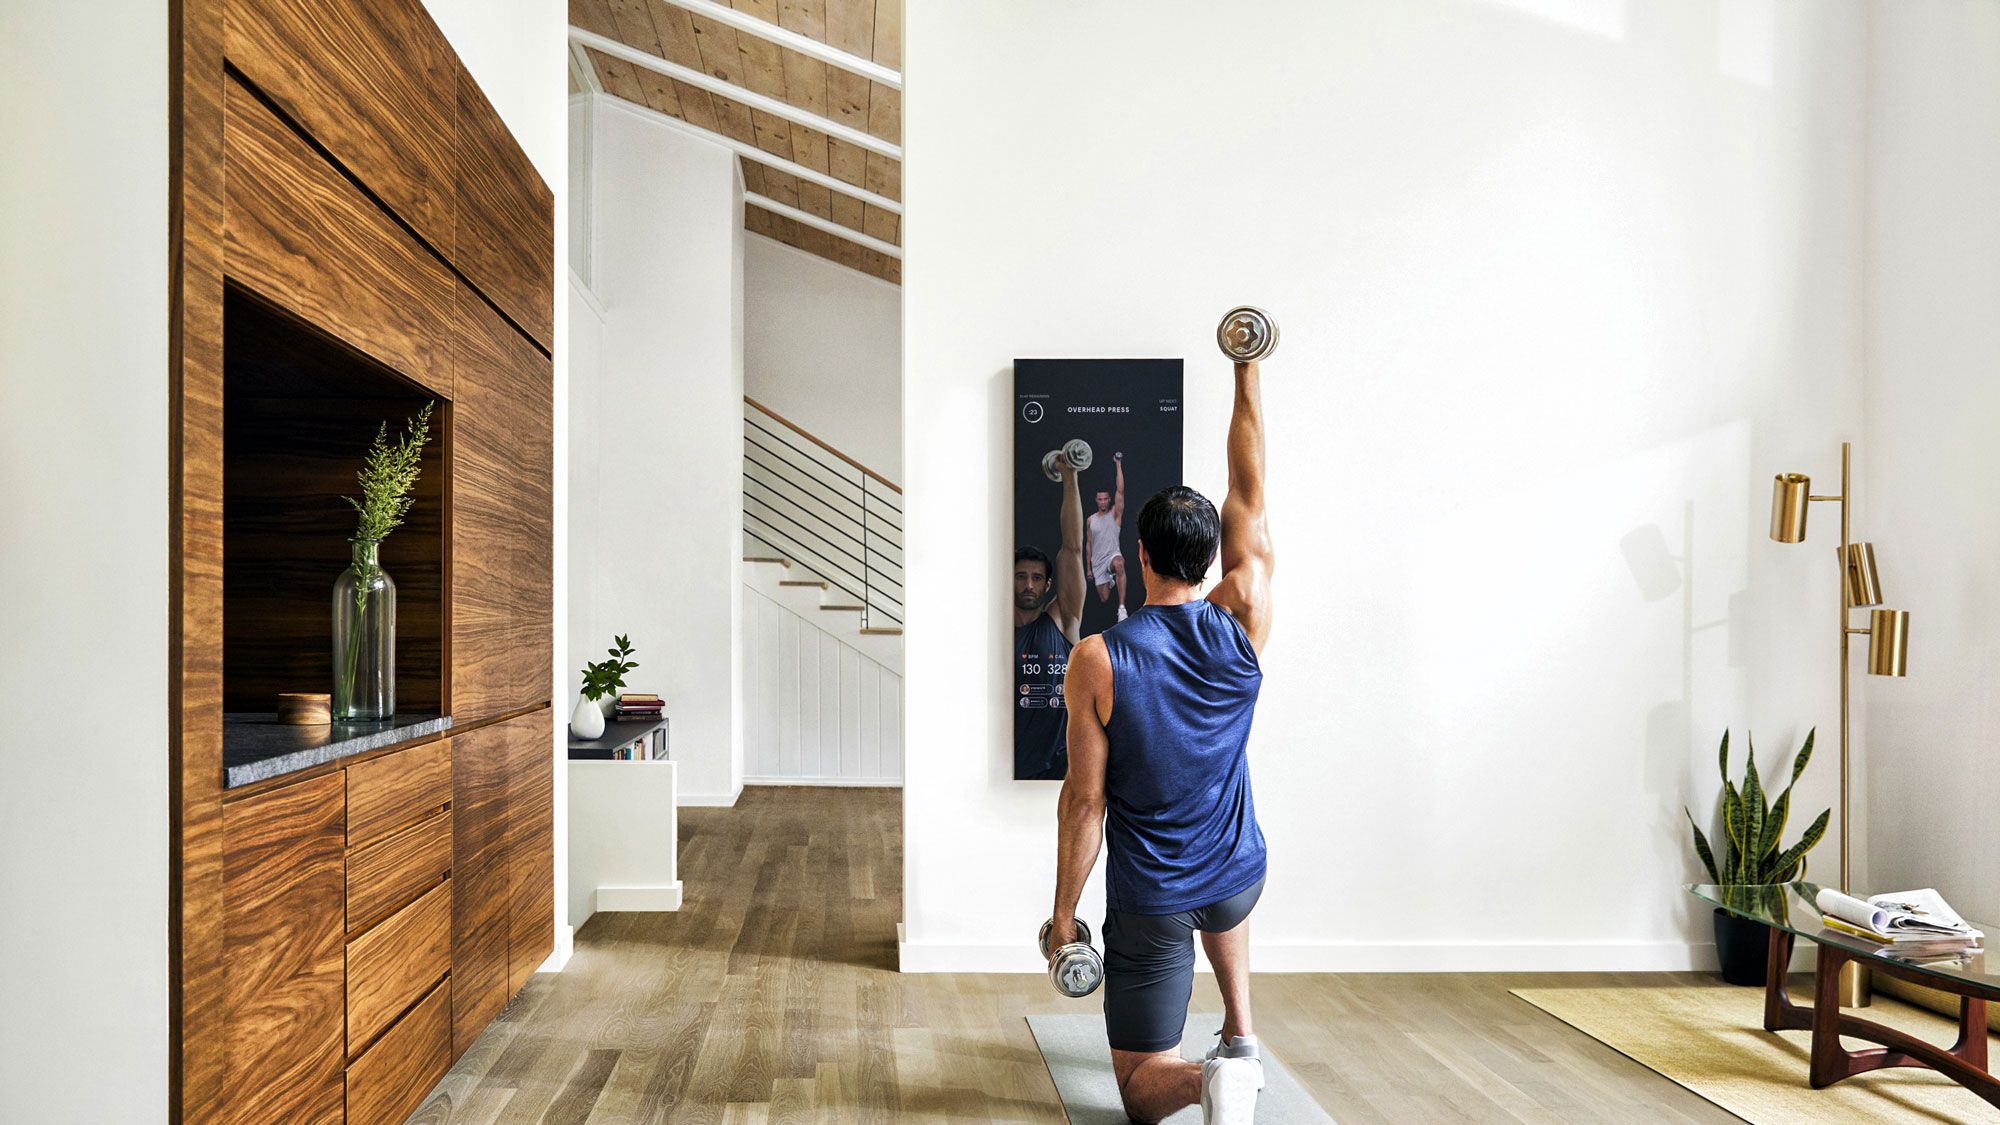 Are Smart Gyms Like Tonal and Mirror Worth It? Best Home Workouts